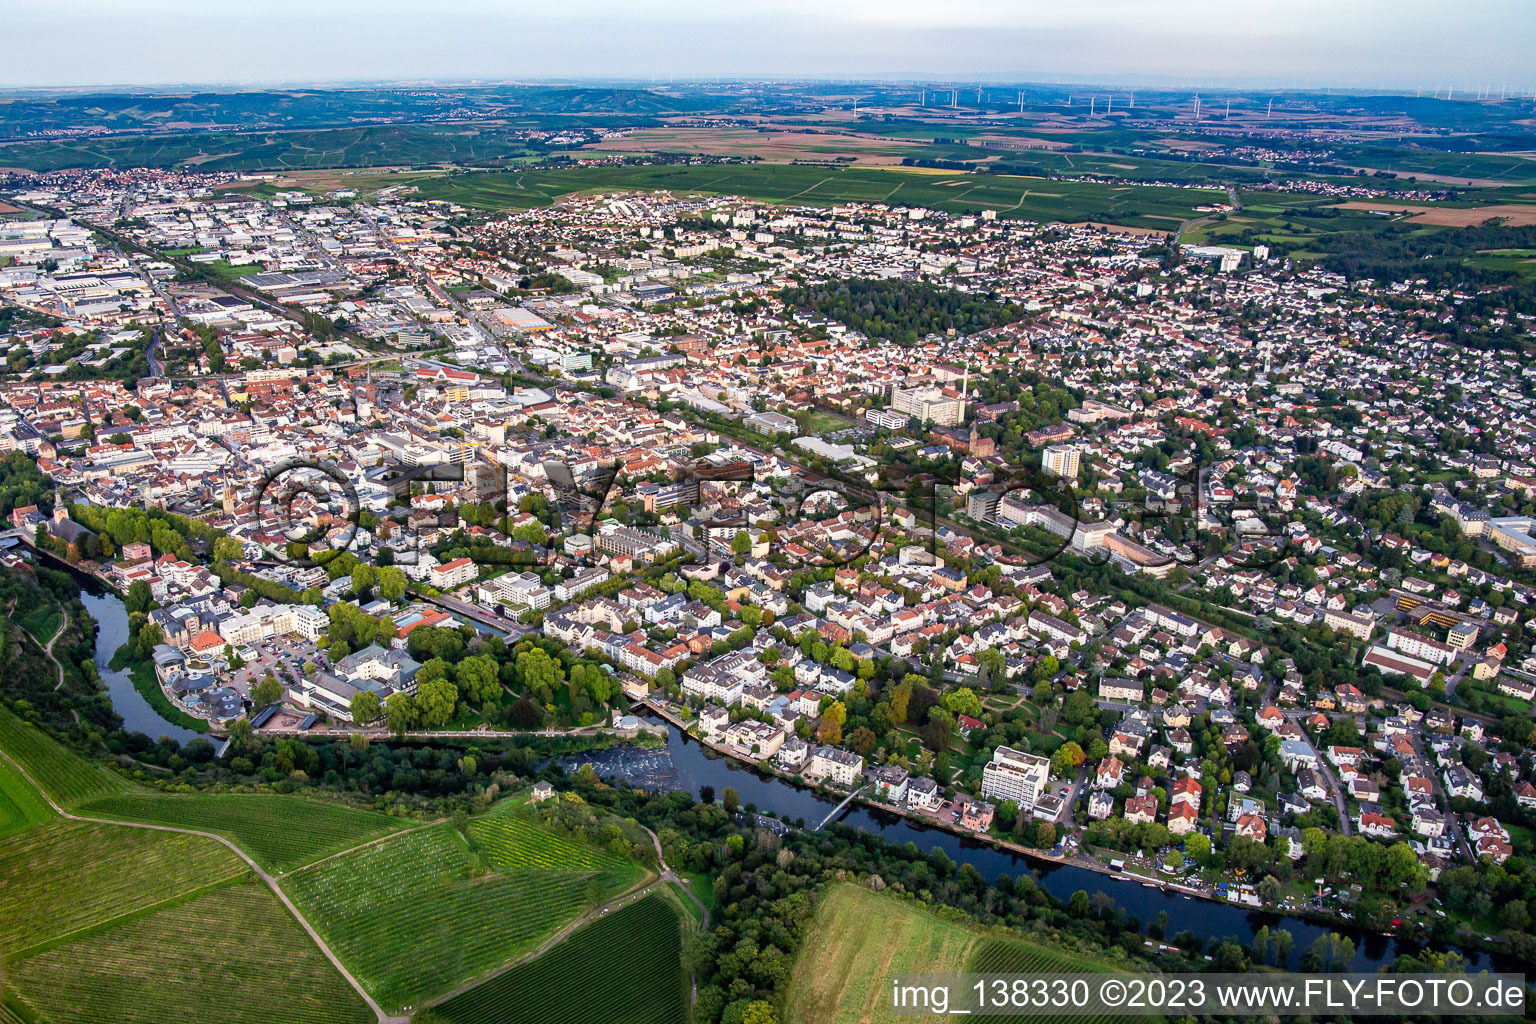 Aerial view of Overview from the southwest in Bad Kreuznach in the state Rhineland-Palatinate, Germany